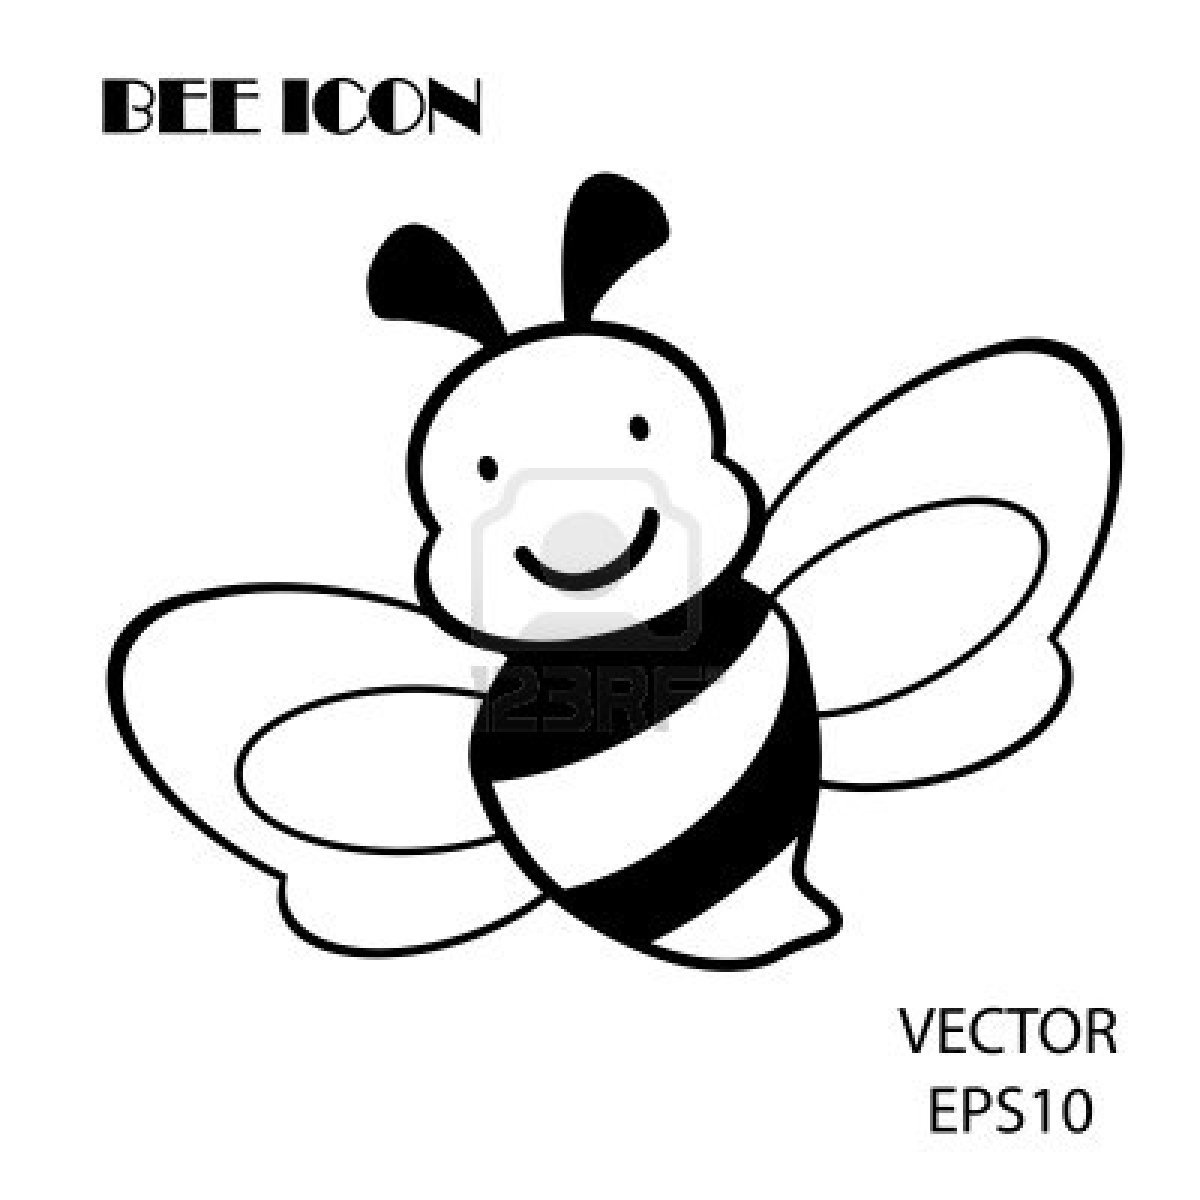 Coloring Pages Draw A Bee - Coloring Page Blog